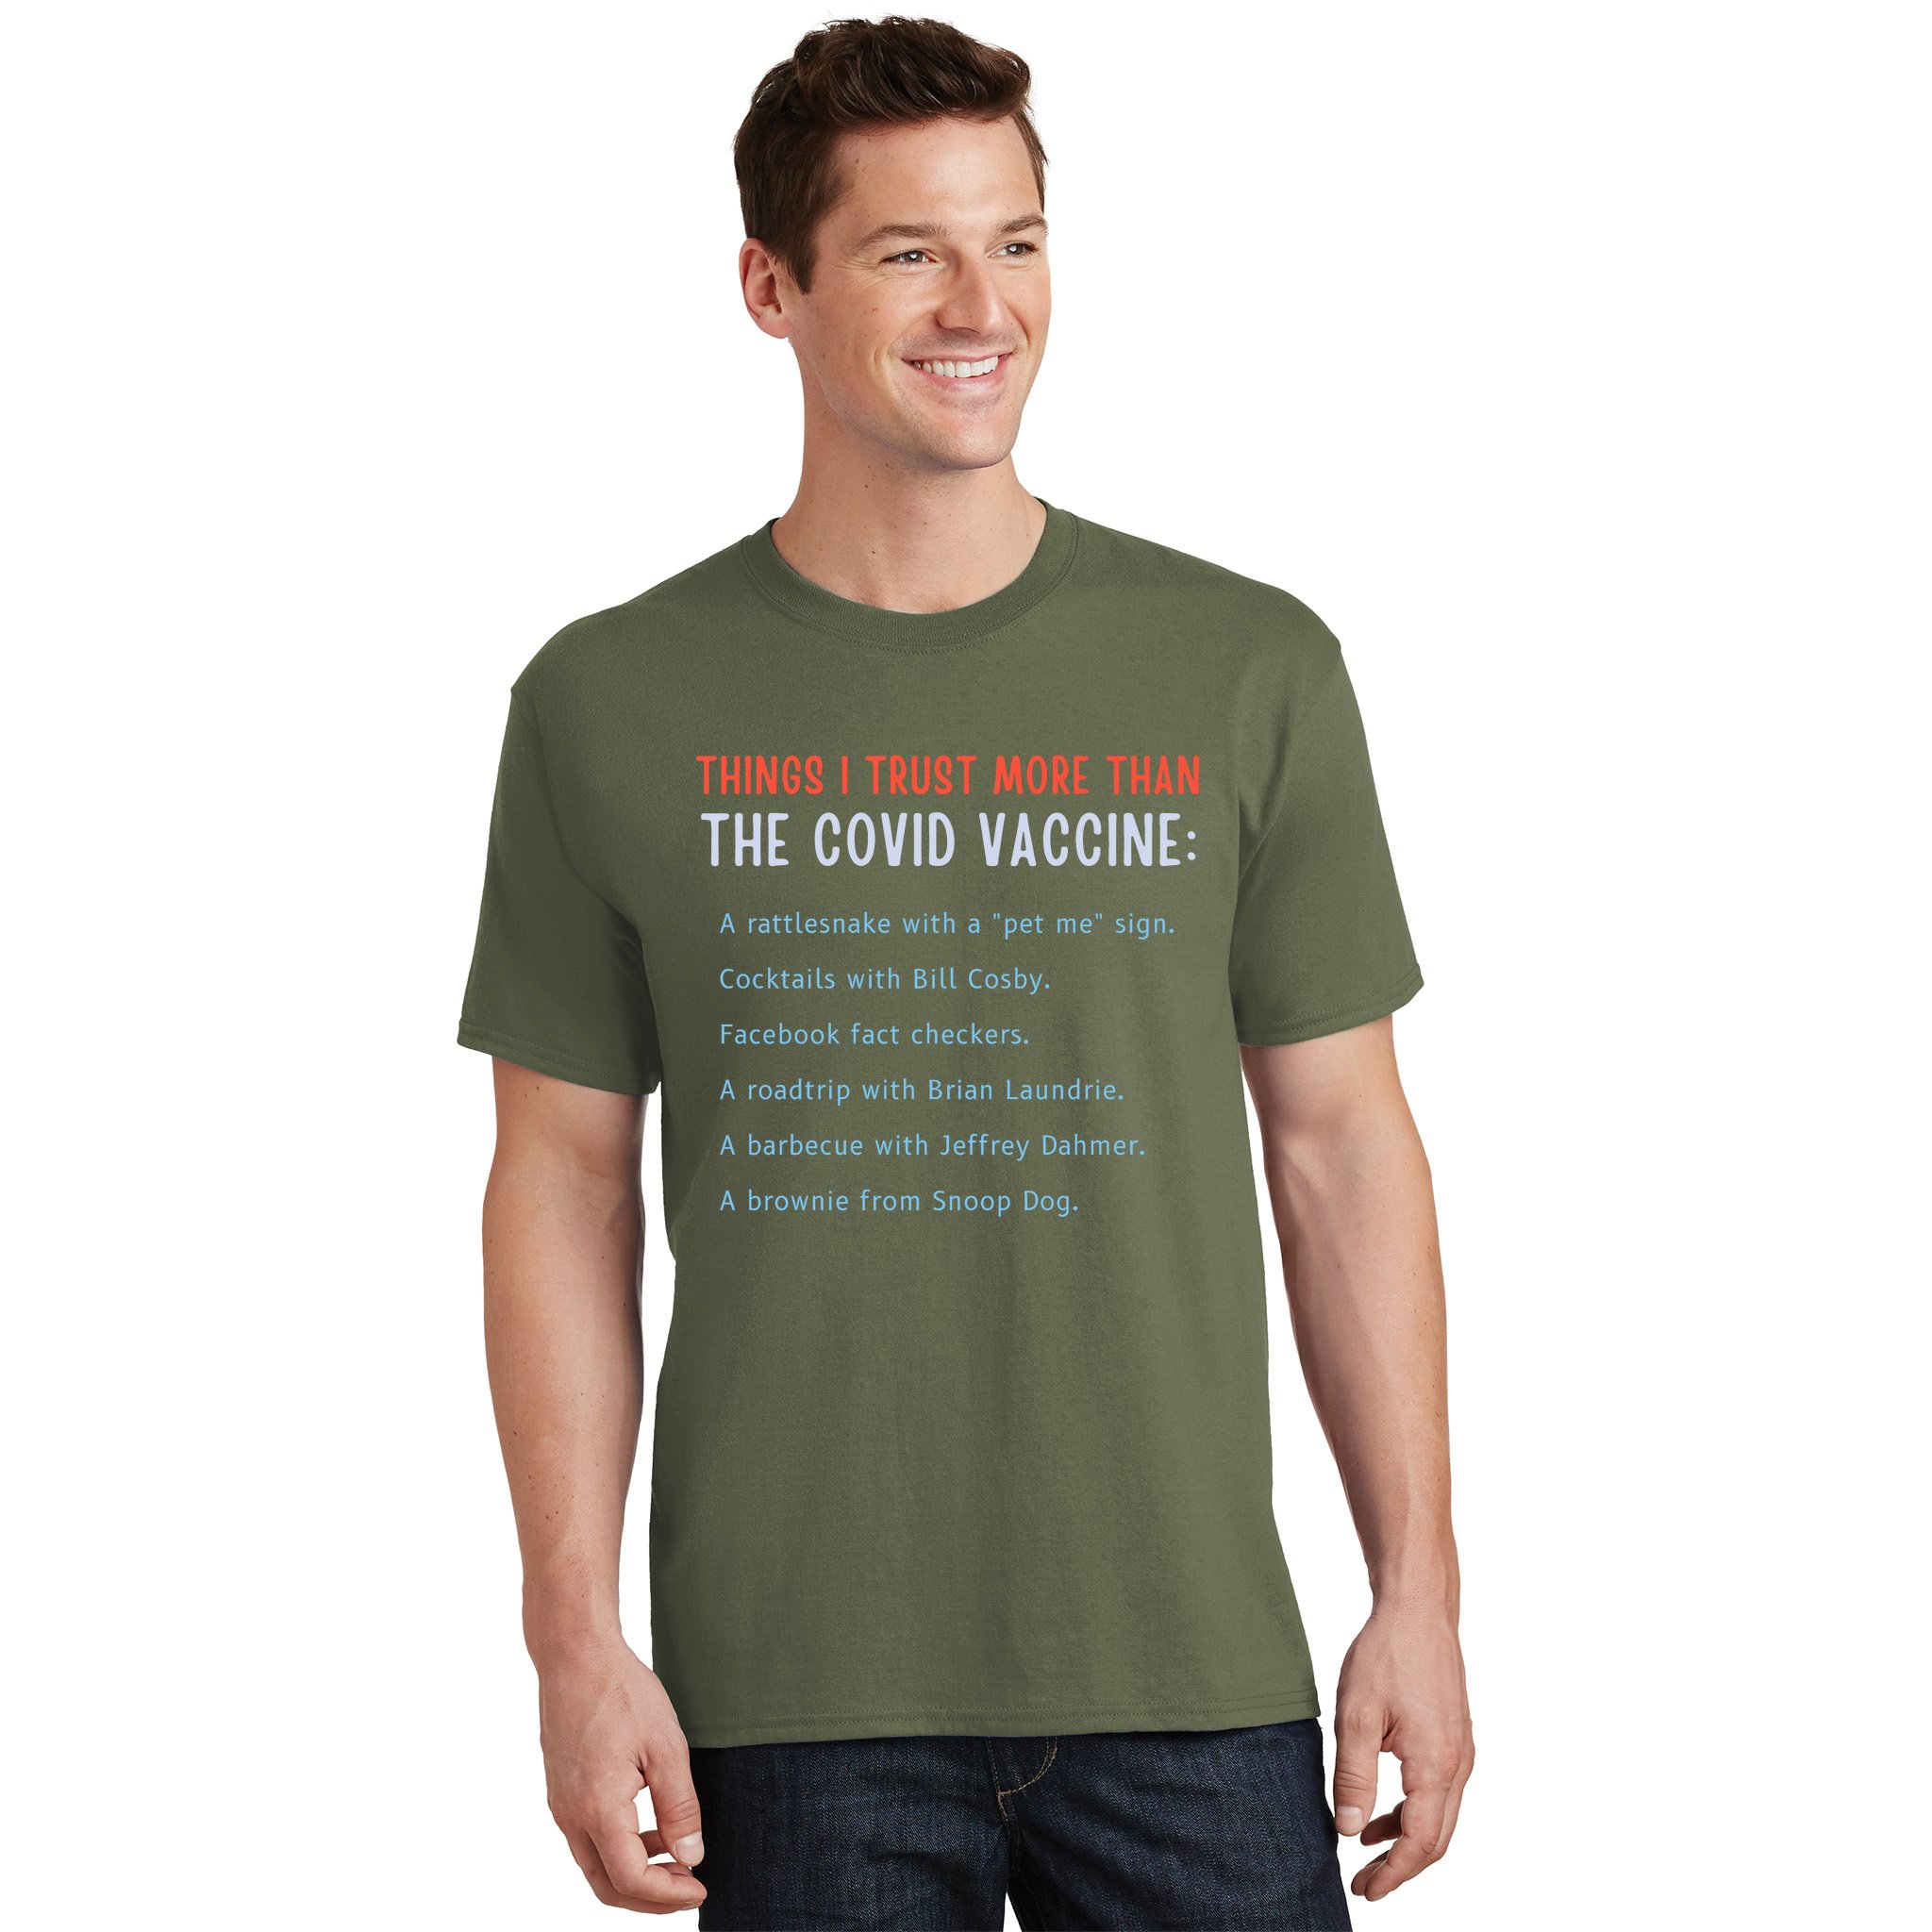 medical freedom unvaccinated stop the Mandate Hold the line shirt covid